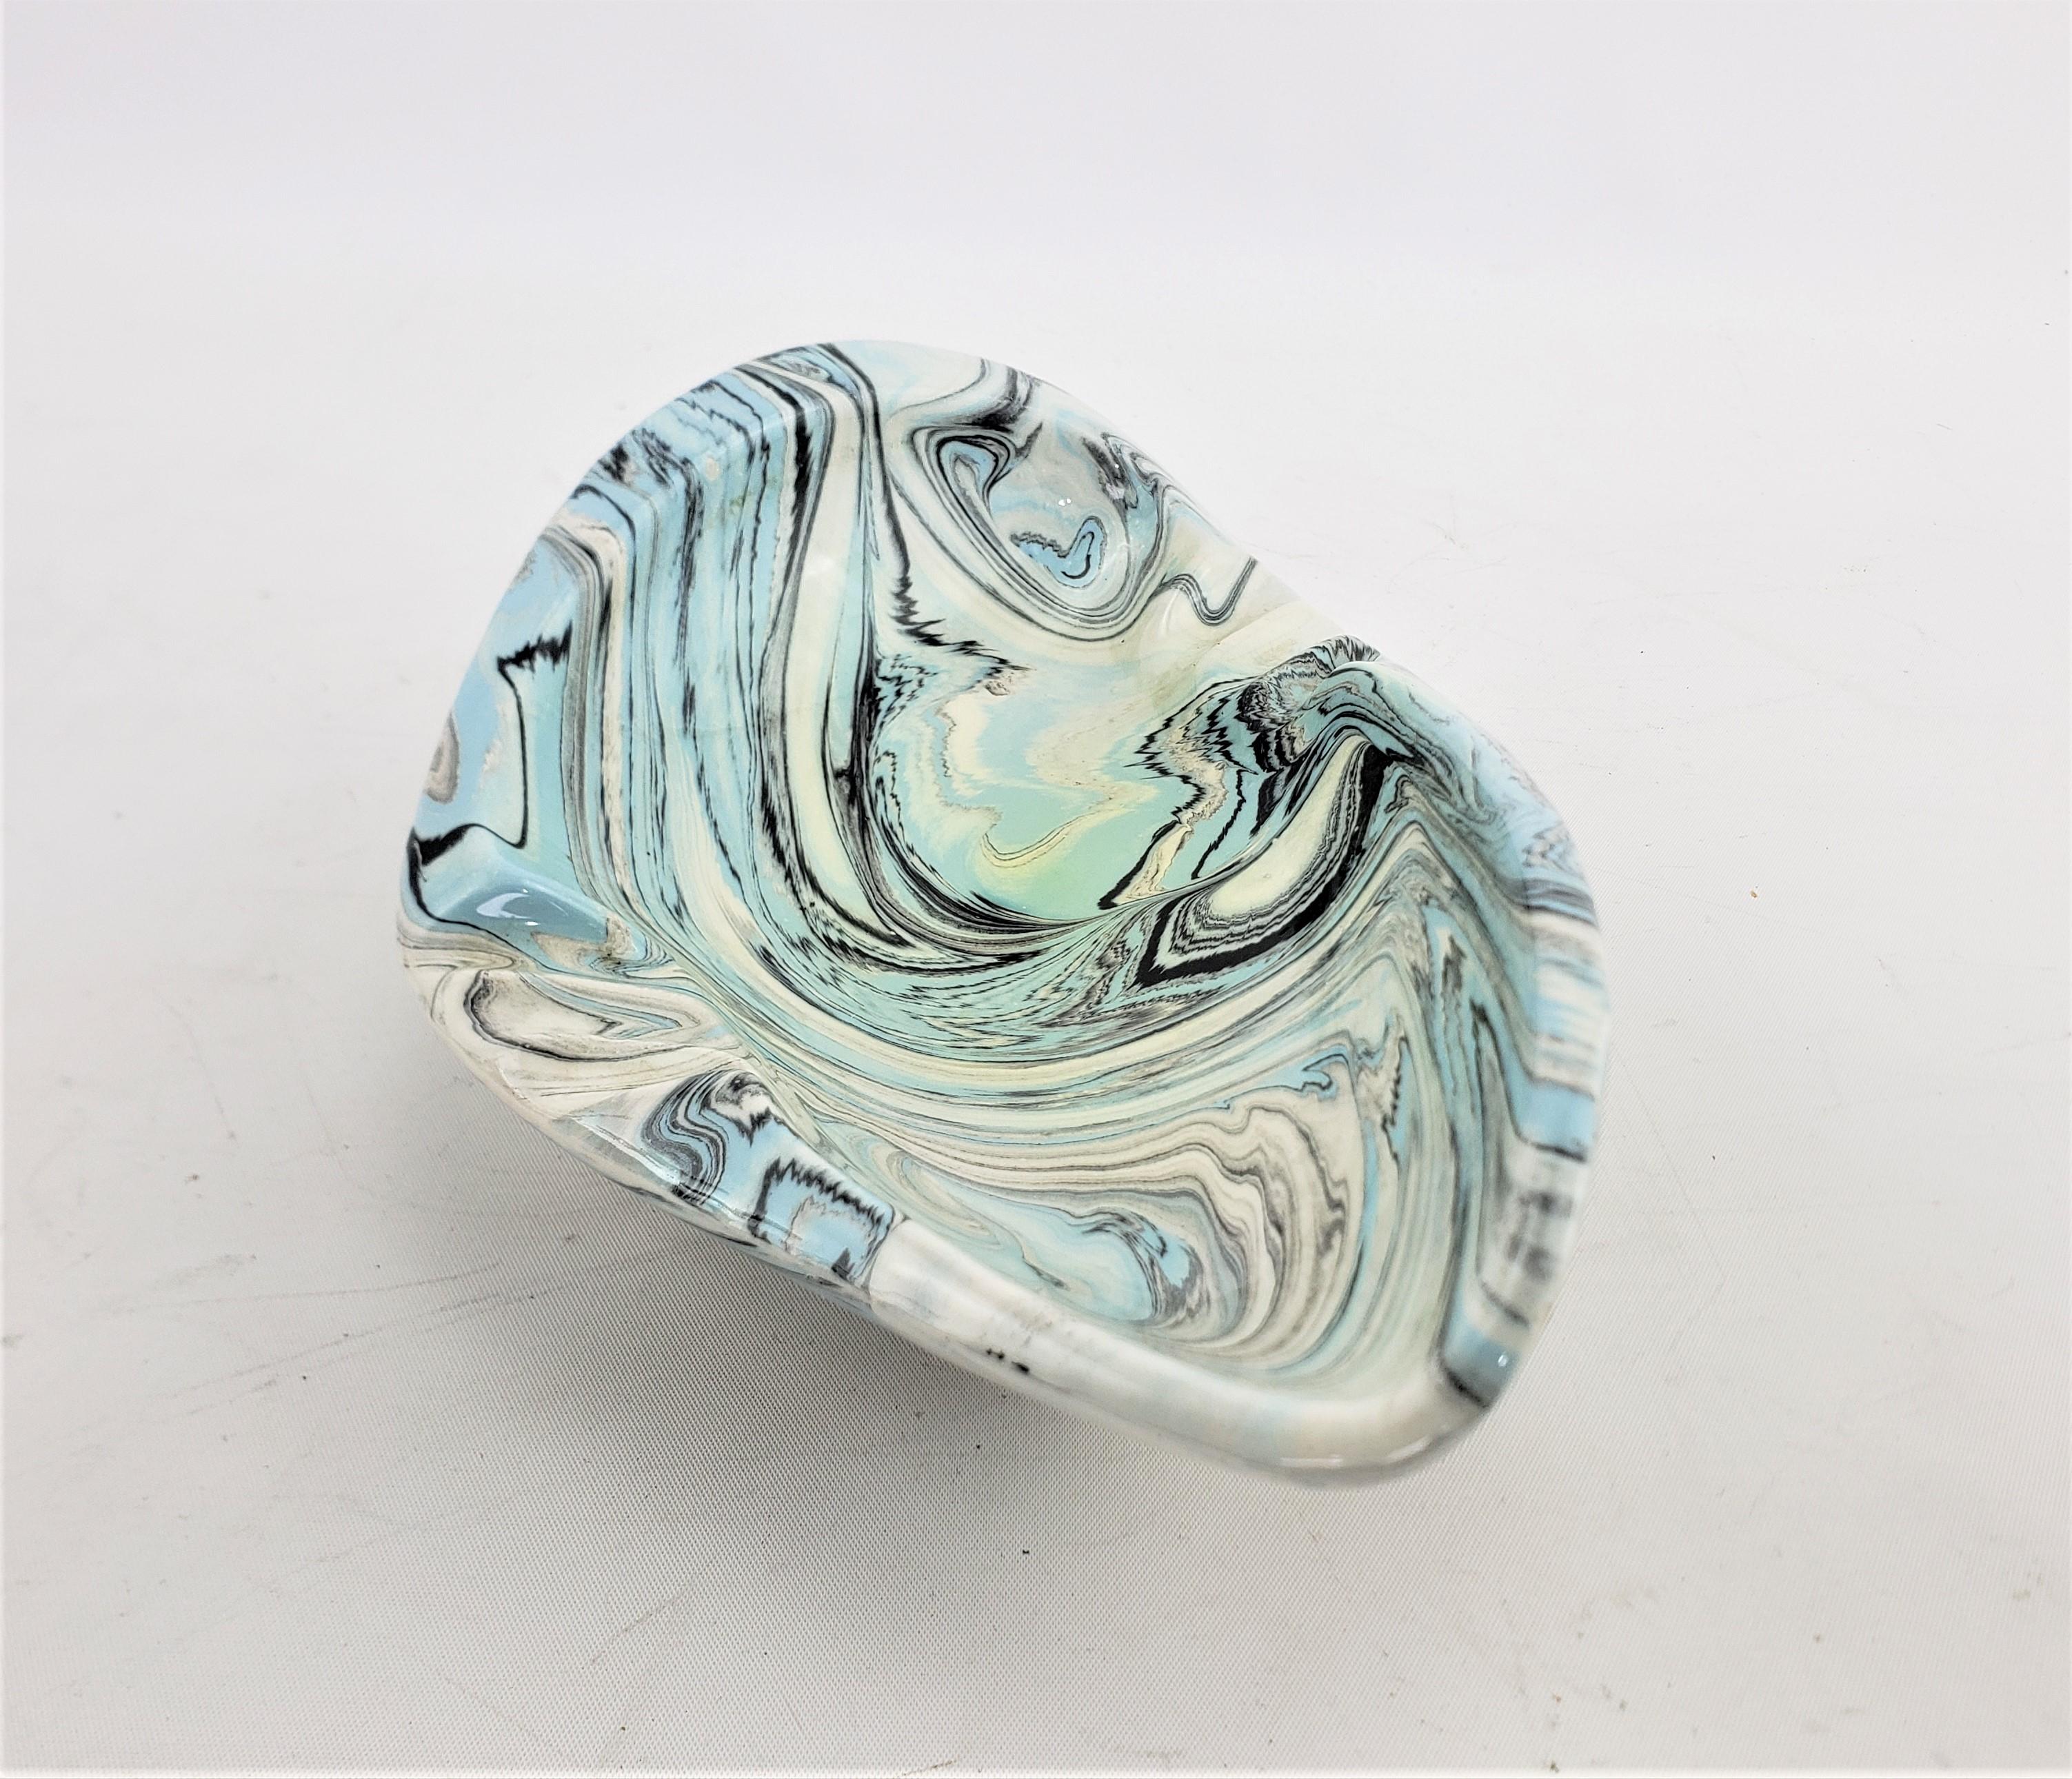 Signed Mid-Century Modern Biomorphic Shaped Ceramic Ashtray with Swirled Glaze In Good Condition For Sale In Hamilton, Ontario